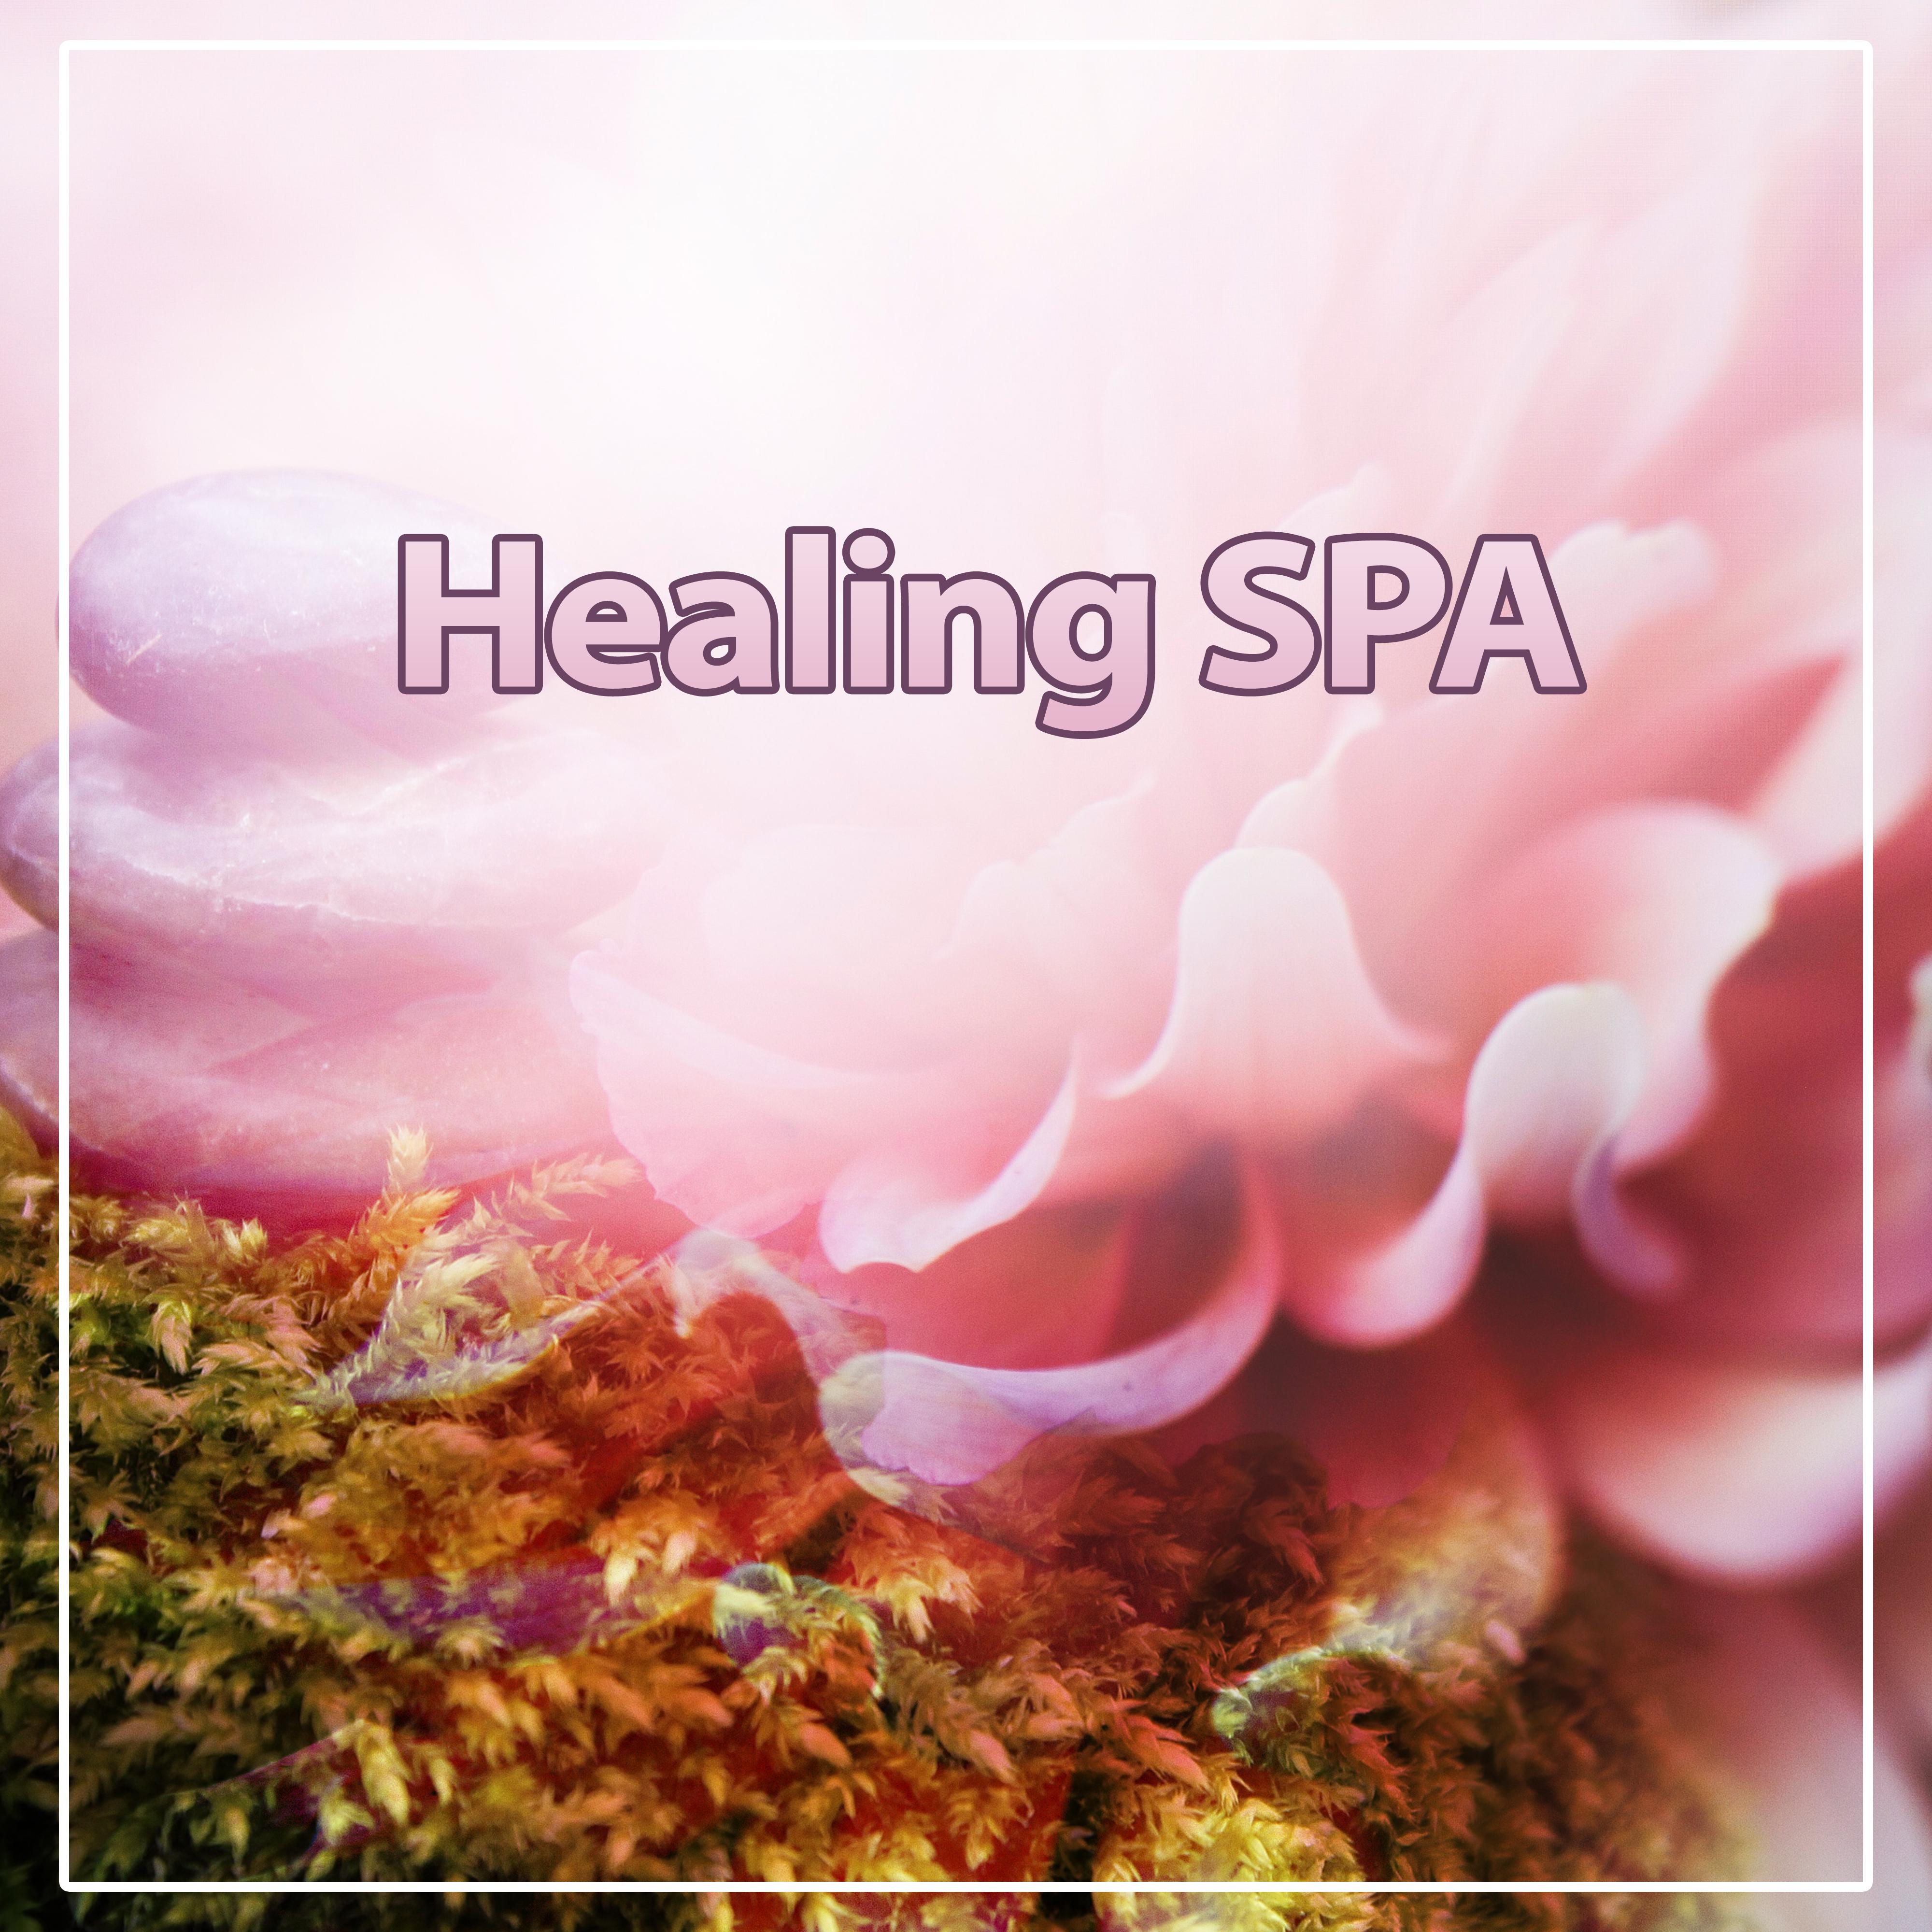 Healing SPA  Nature Sounds for Massage, Bliss Spa, Relaxing Spa Therapy